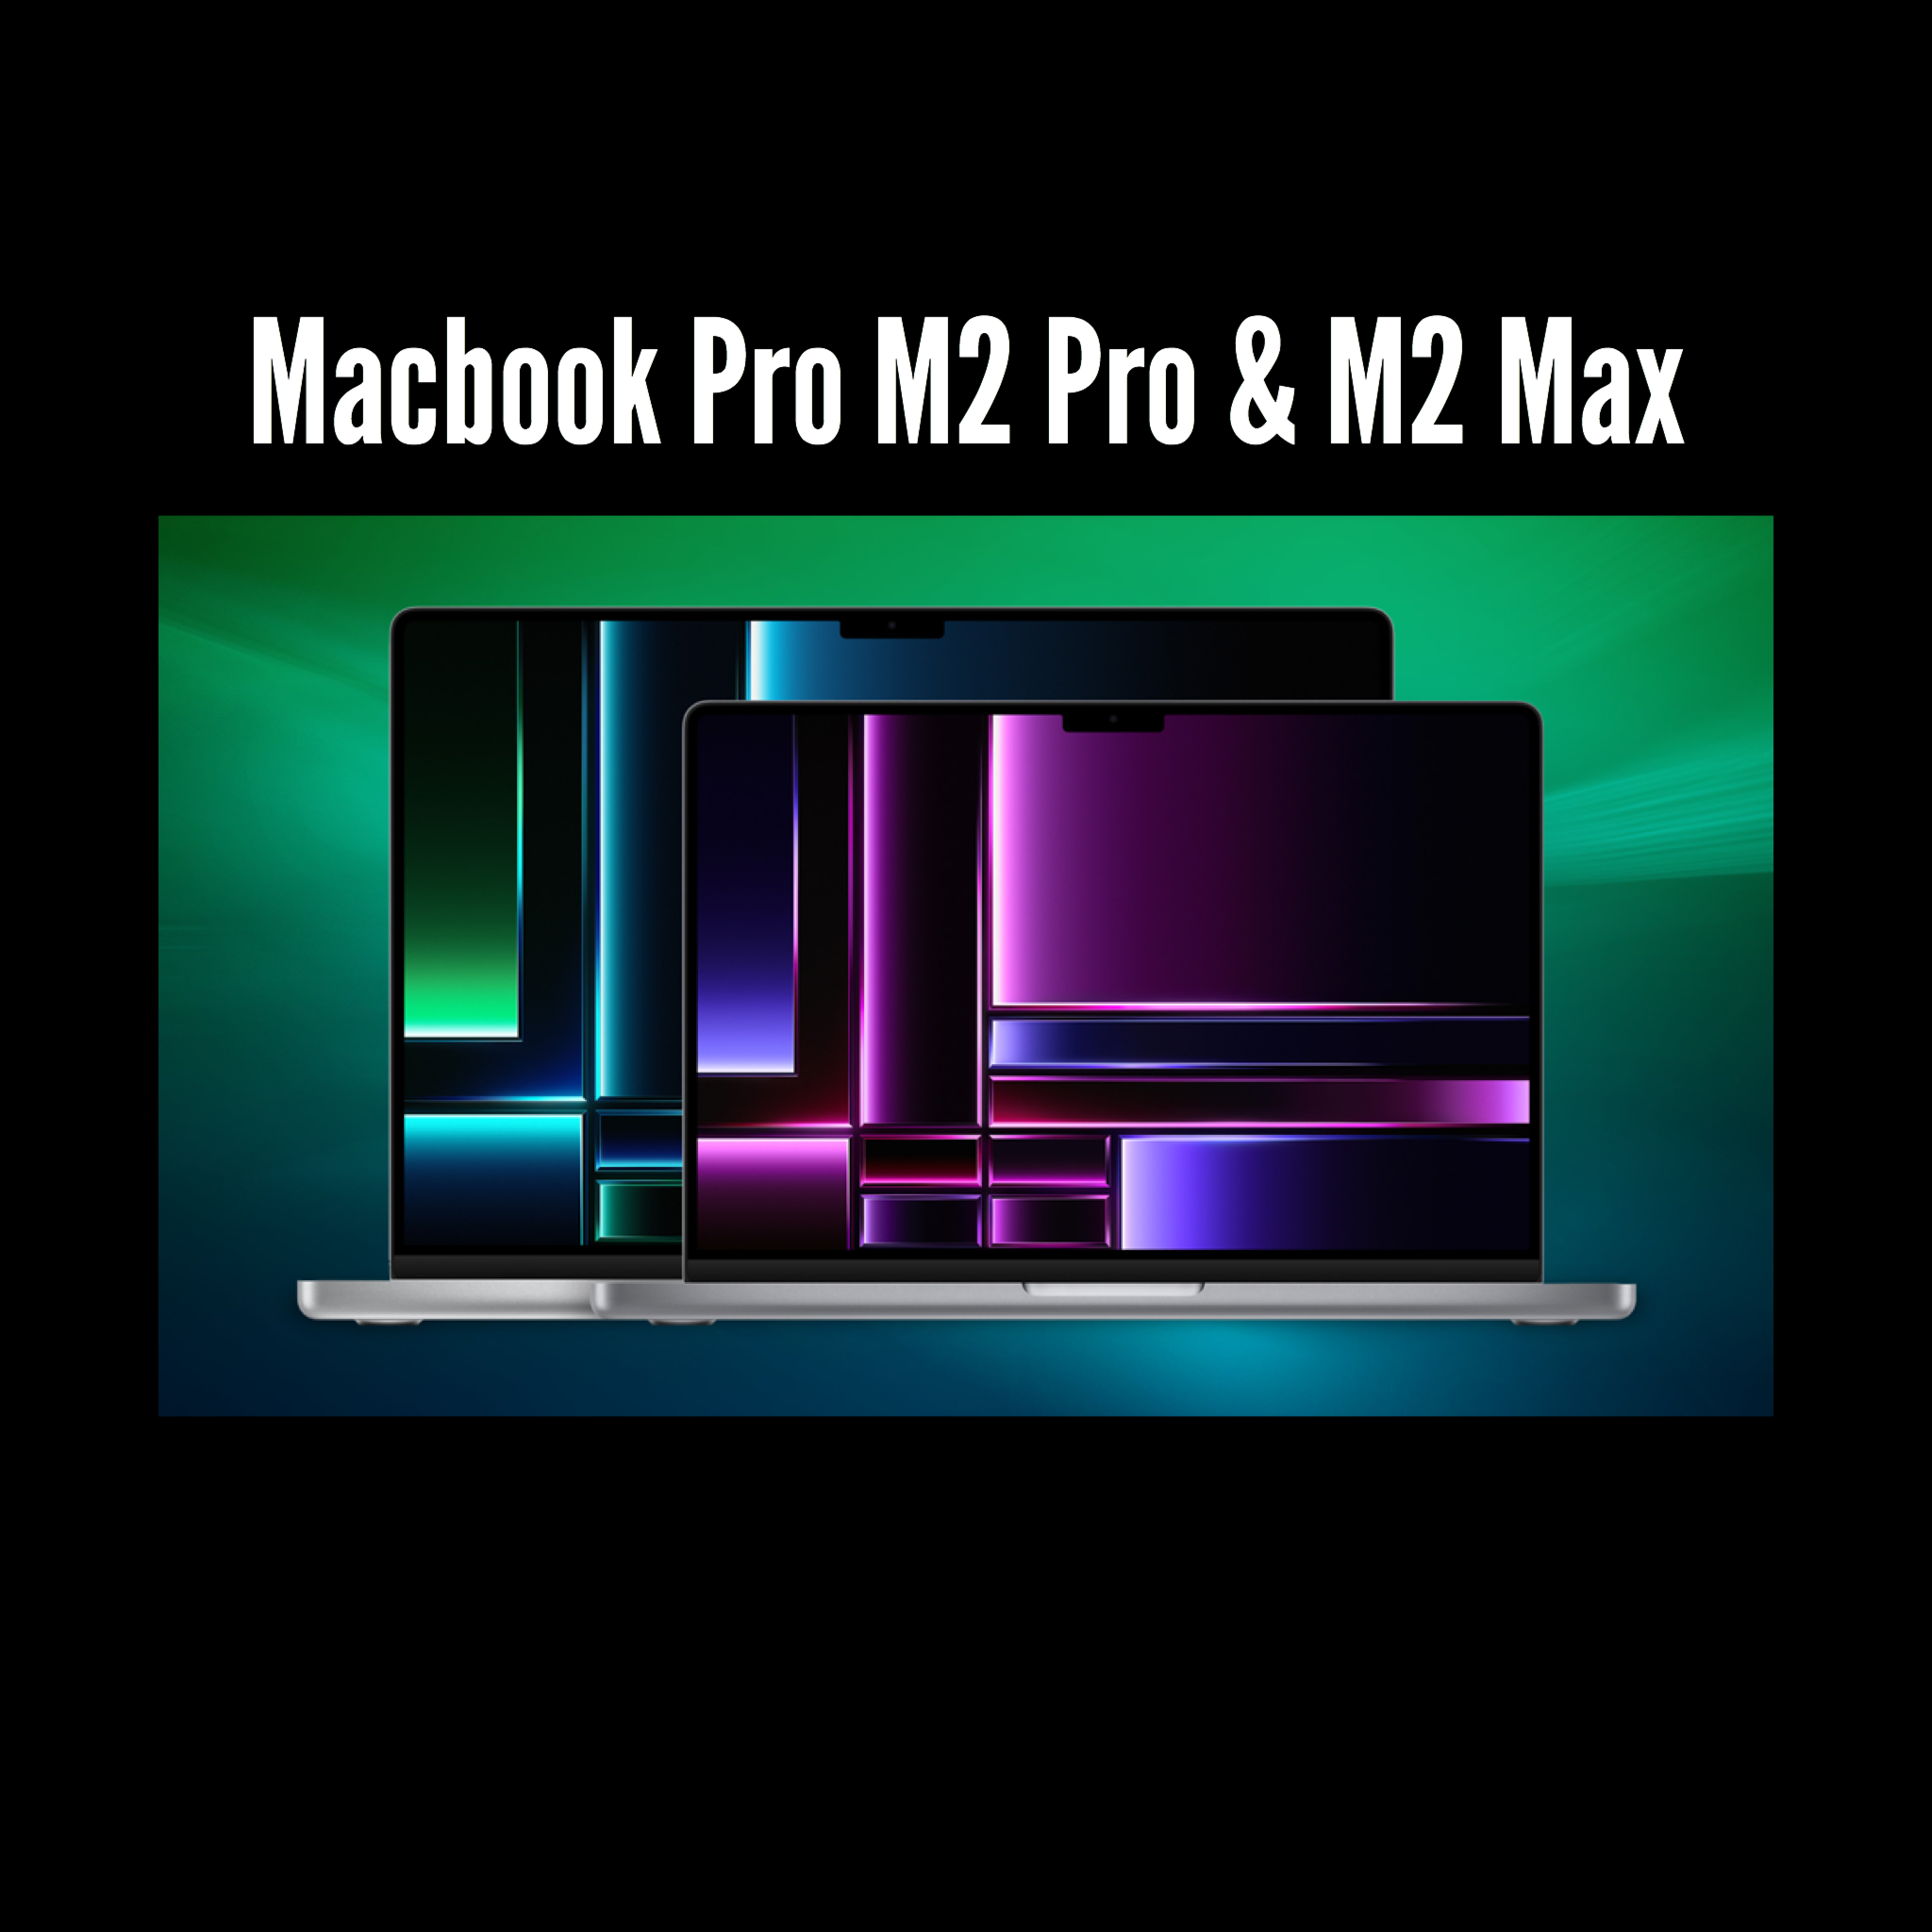 Apple Releases Newer Macbook Pro's with M2 Pro and M2 Max Chips and they're.....slower than last years models?